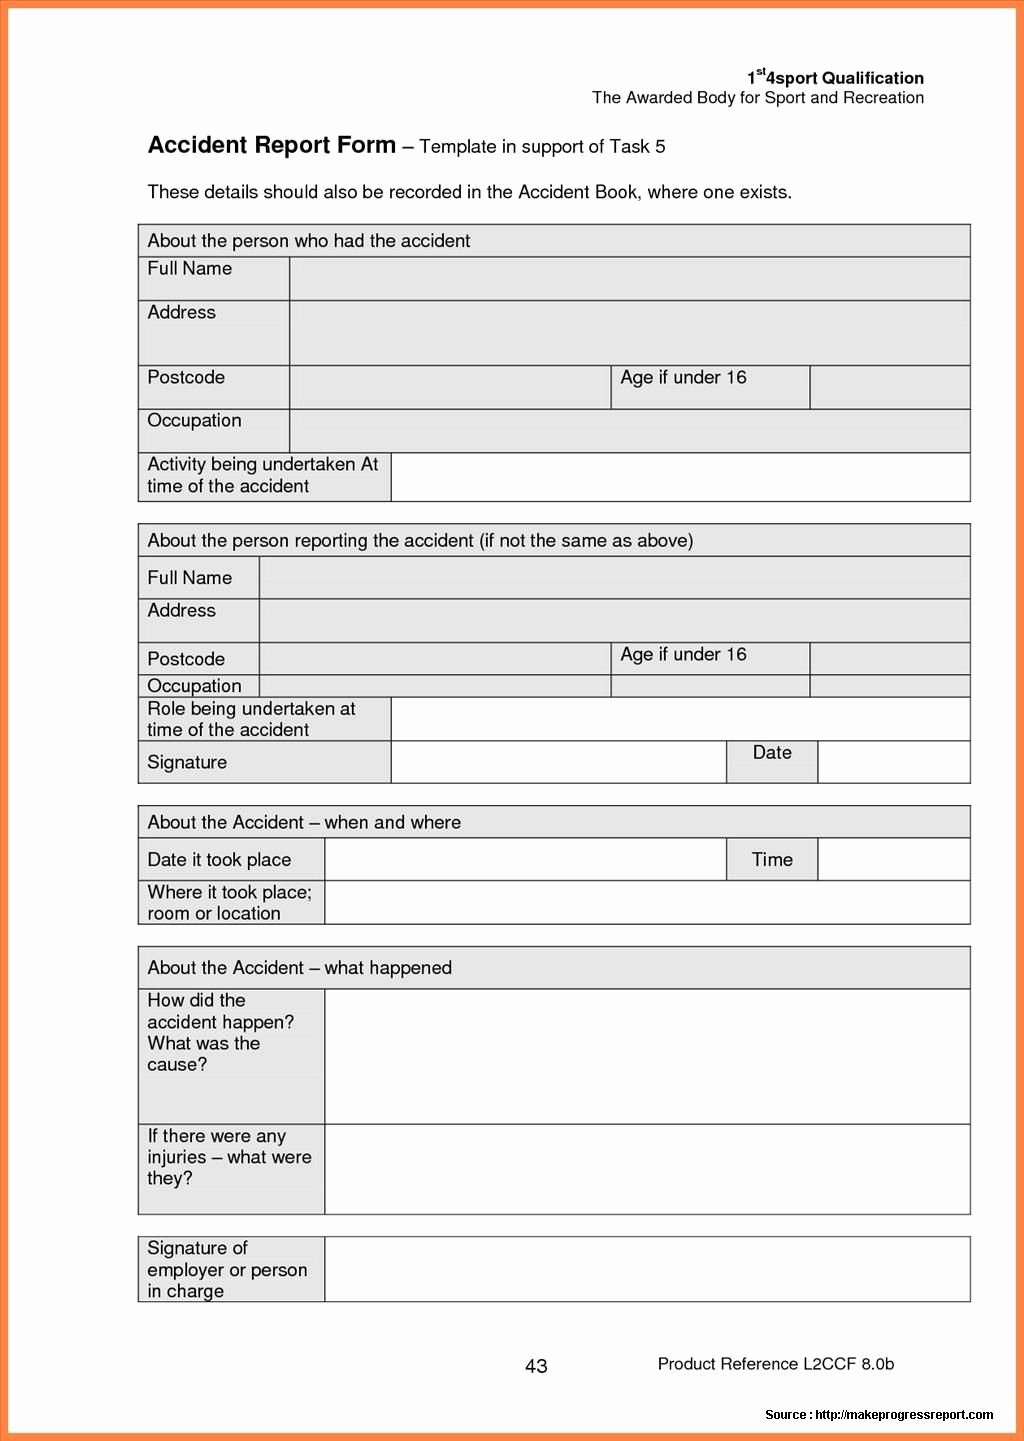 Accident Report Template Word Best Of Construction Accident Report form Sample Work